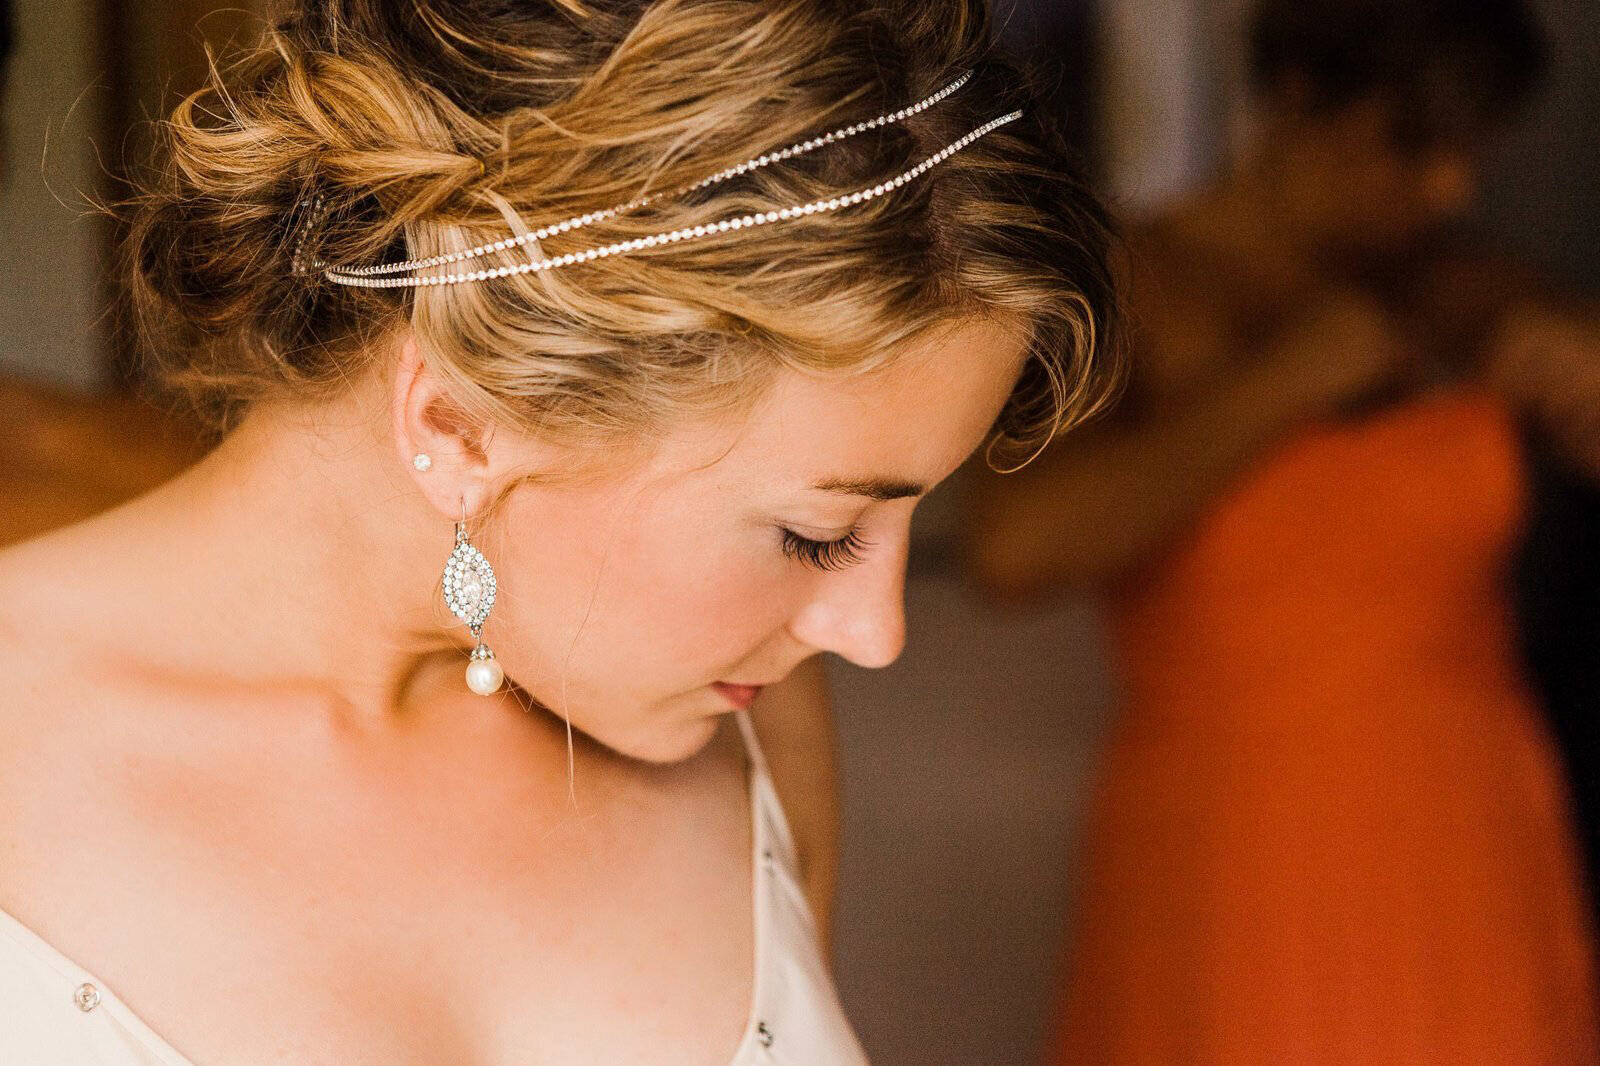 a bride wearing a beaded headband and crystal earrings looking over her shoulder